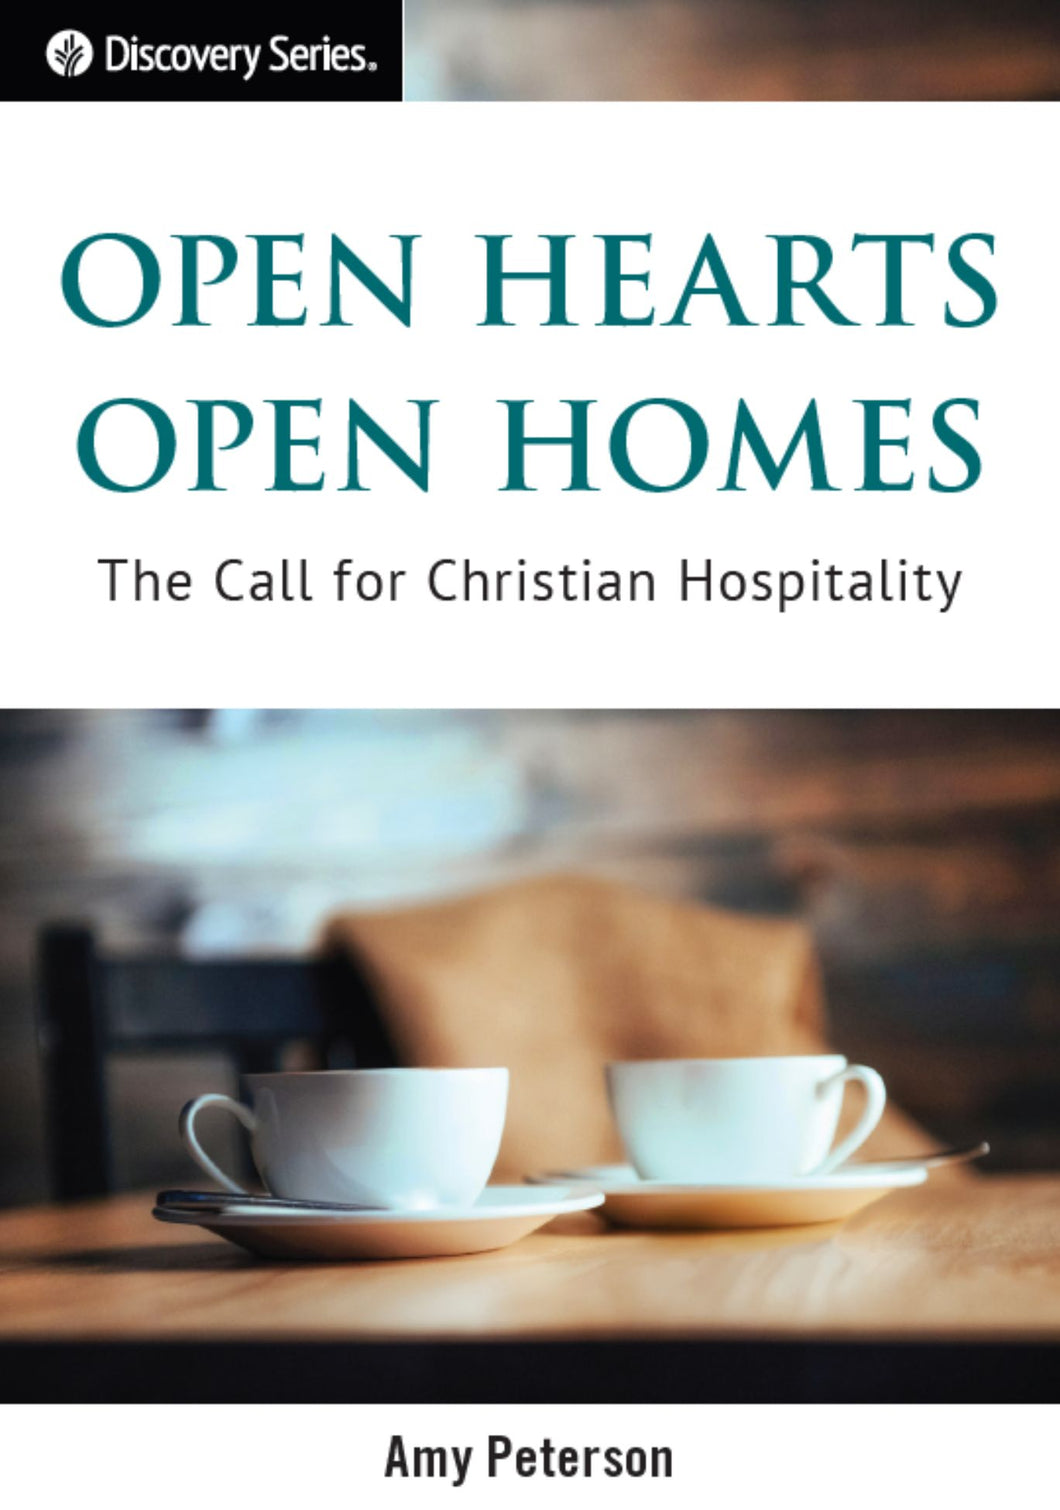 Open Hearts Open Homes - The Call for Christian Hospitality